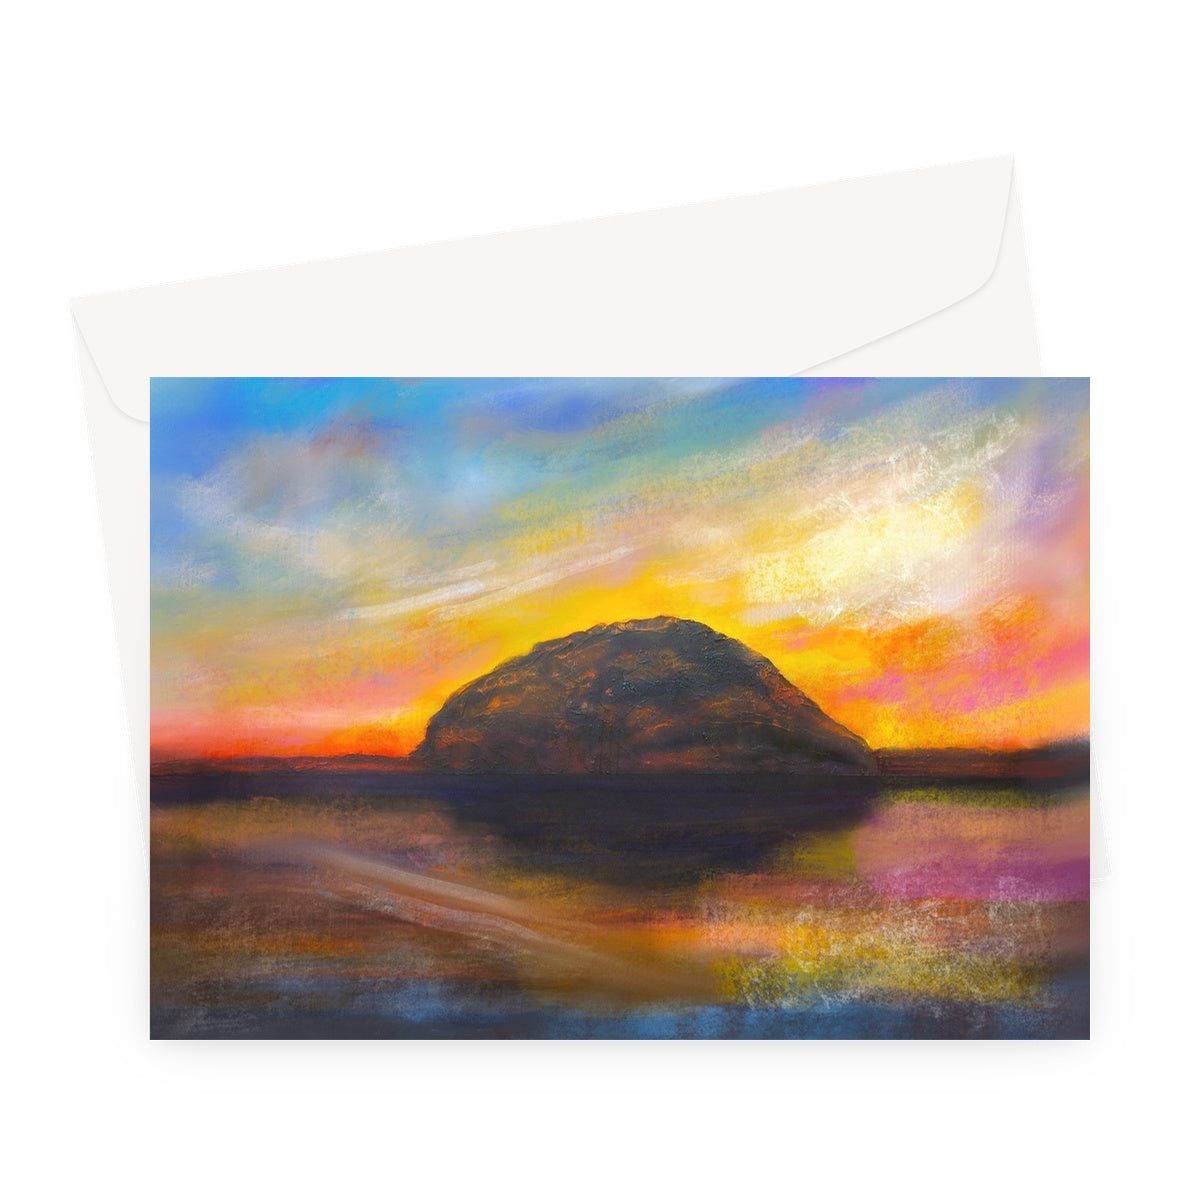 Ailsa Craig Dusk Arran Art Gifts Greeting Card-Greetings Cards-Arran Art Gallery-A5 Landscape-10 Cards-Paintings, Prints, Homeware, Art Gifts From Scotland By Scottish Artist Kevin Hunter